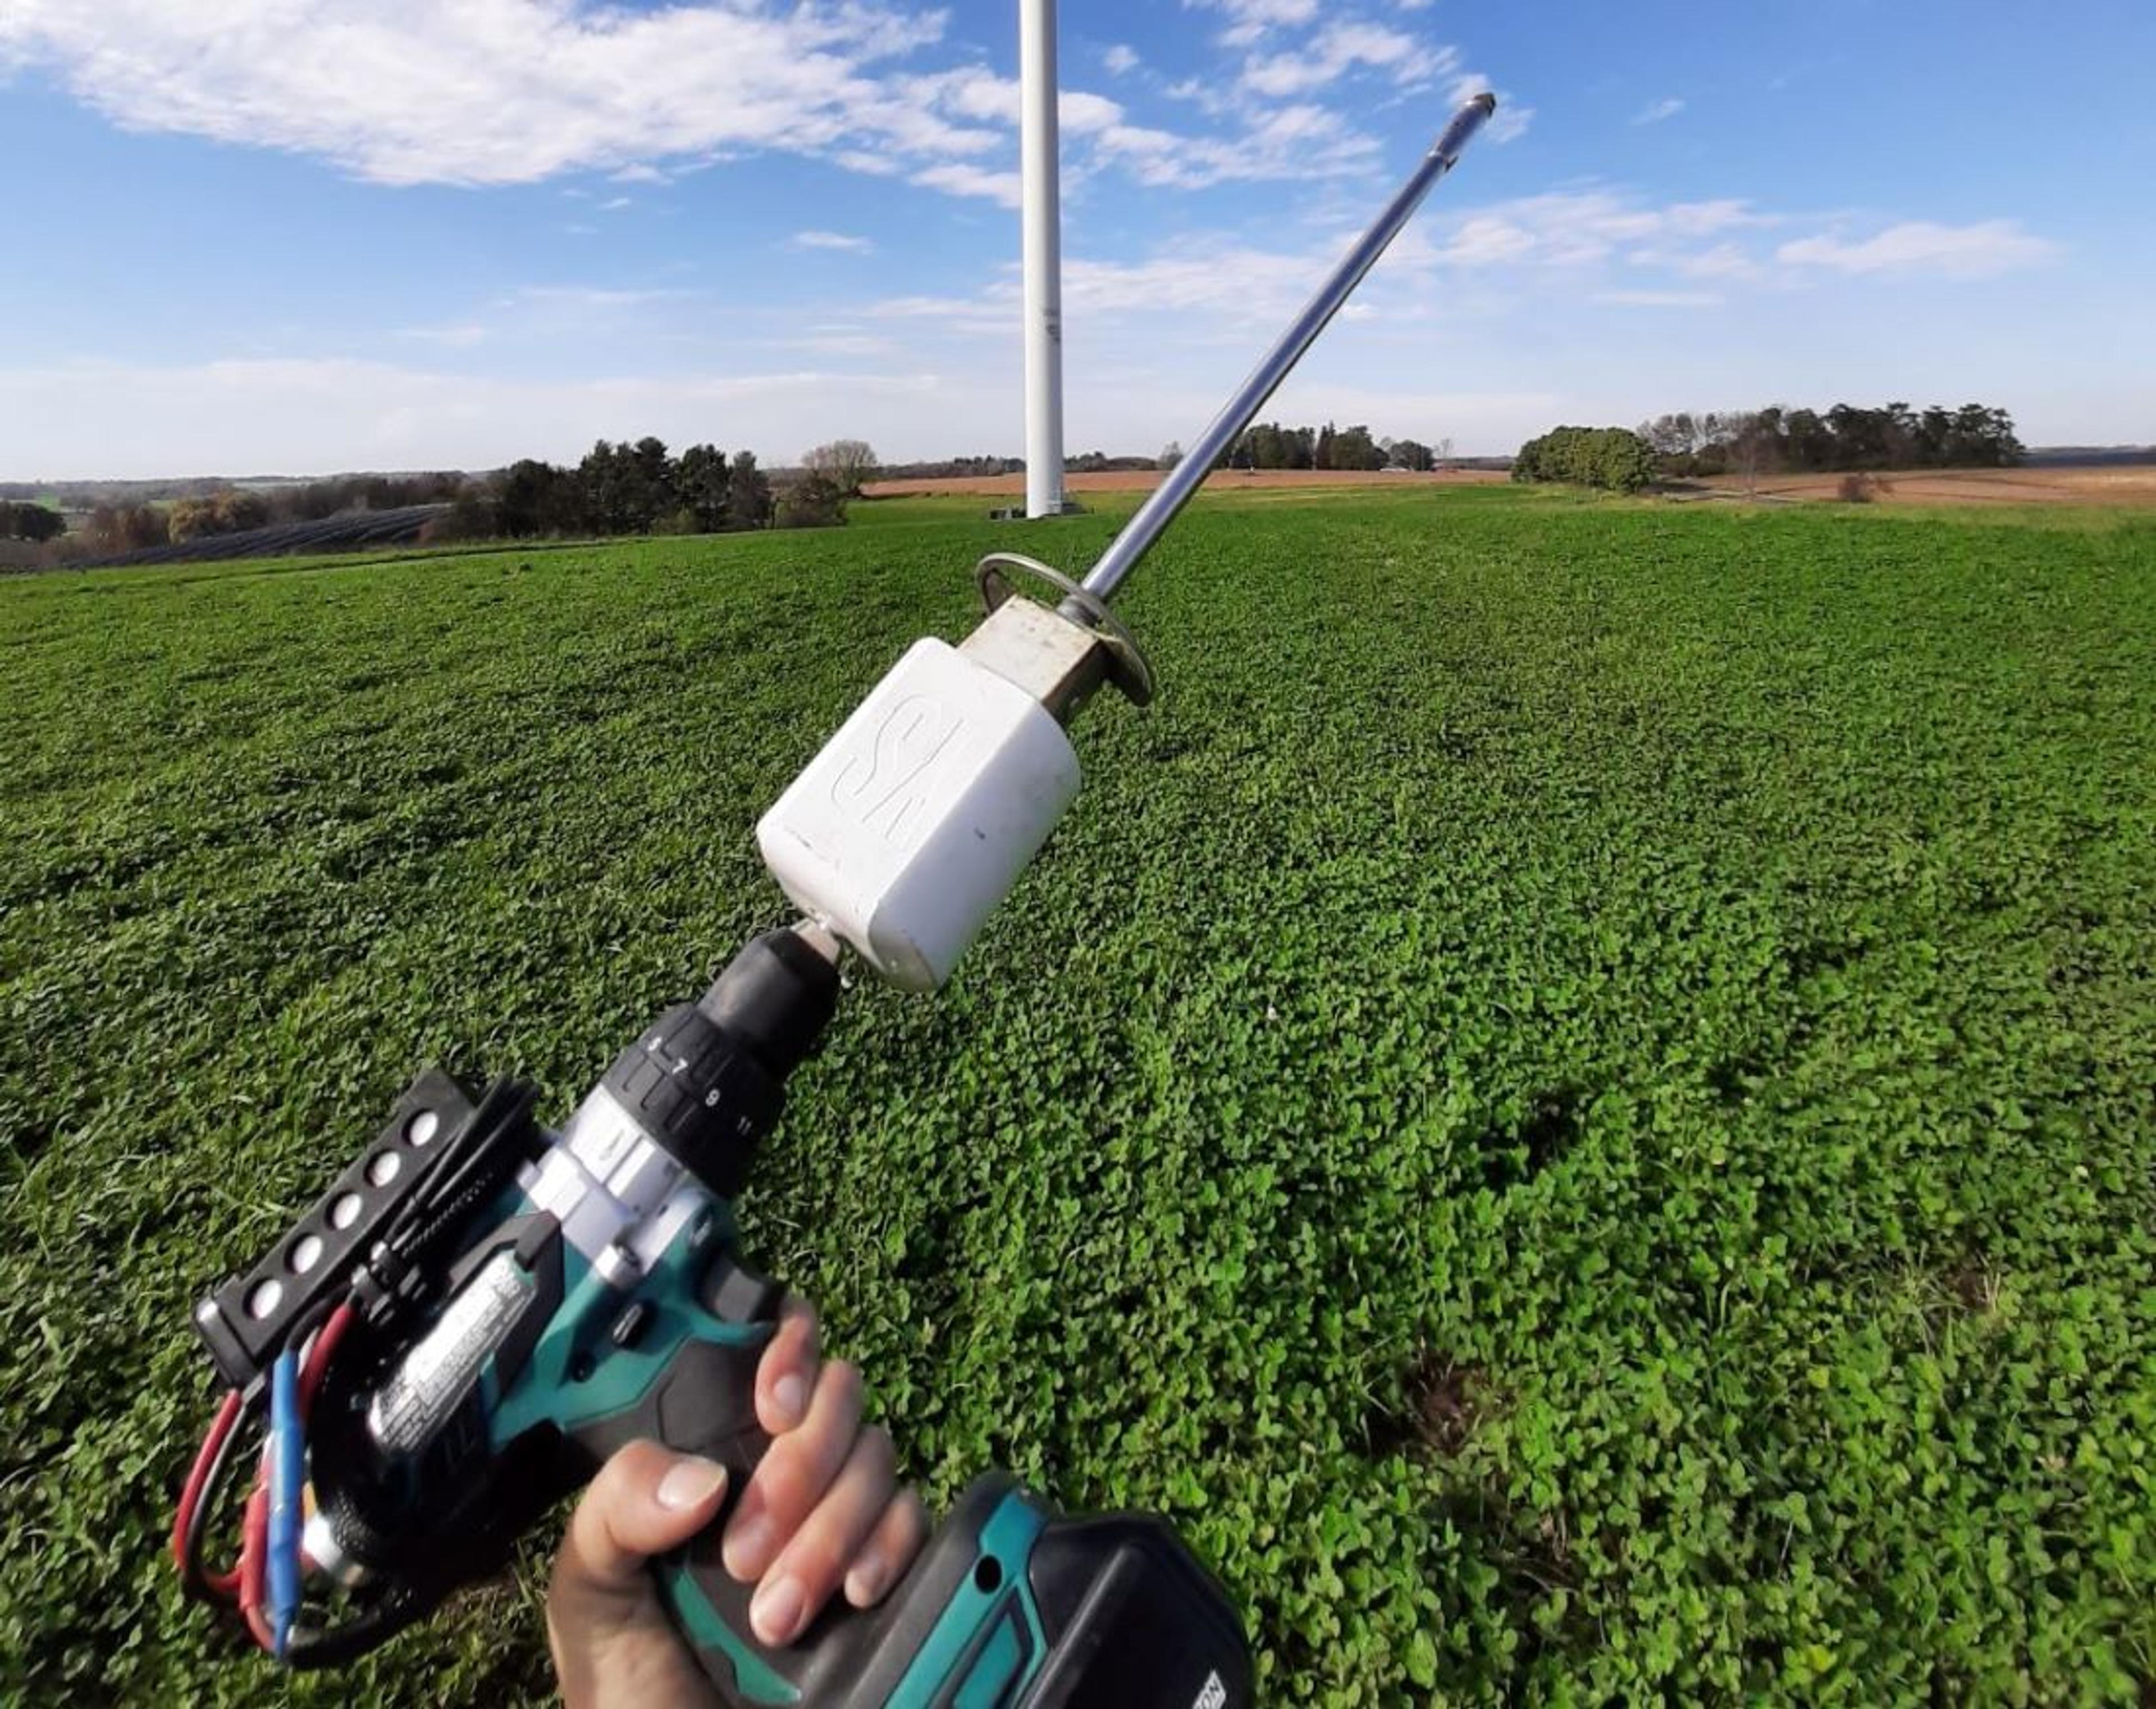 A probe for testing carbon in soil.